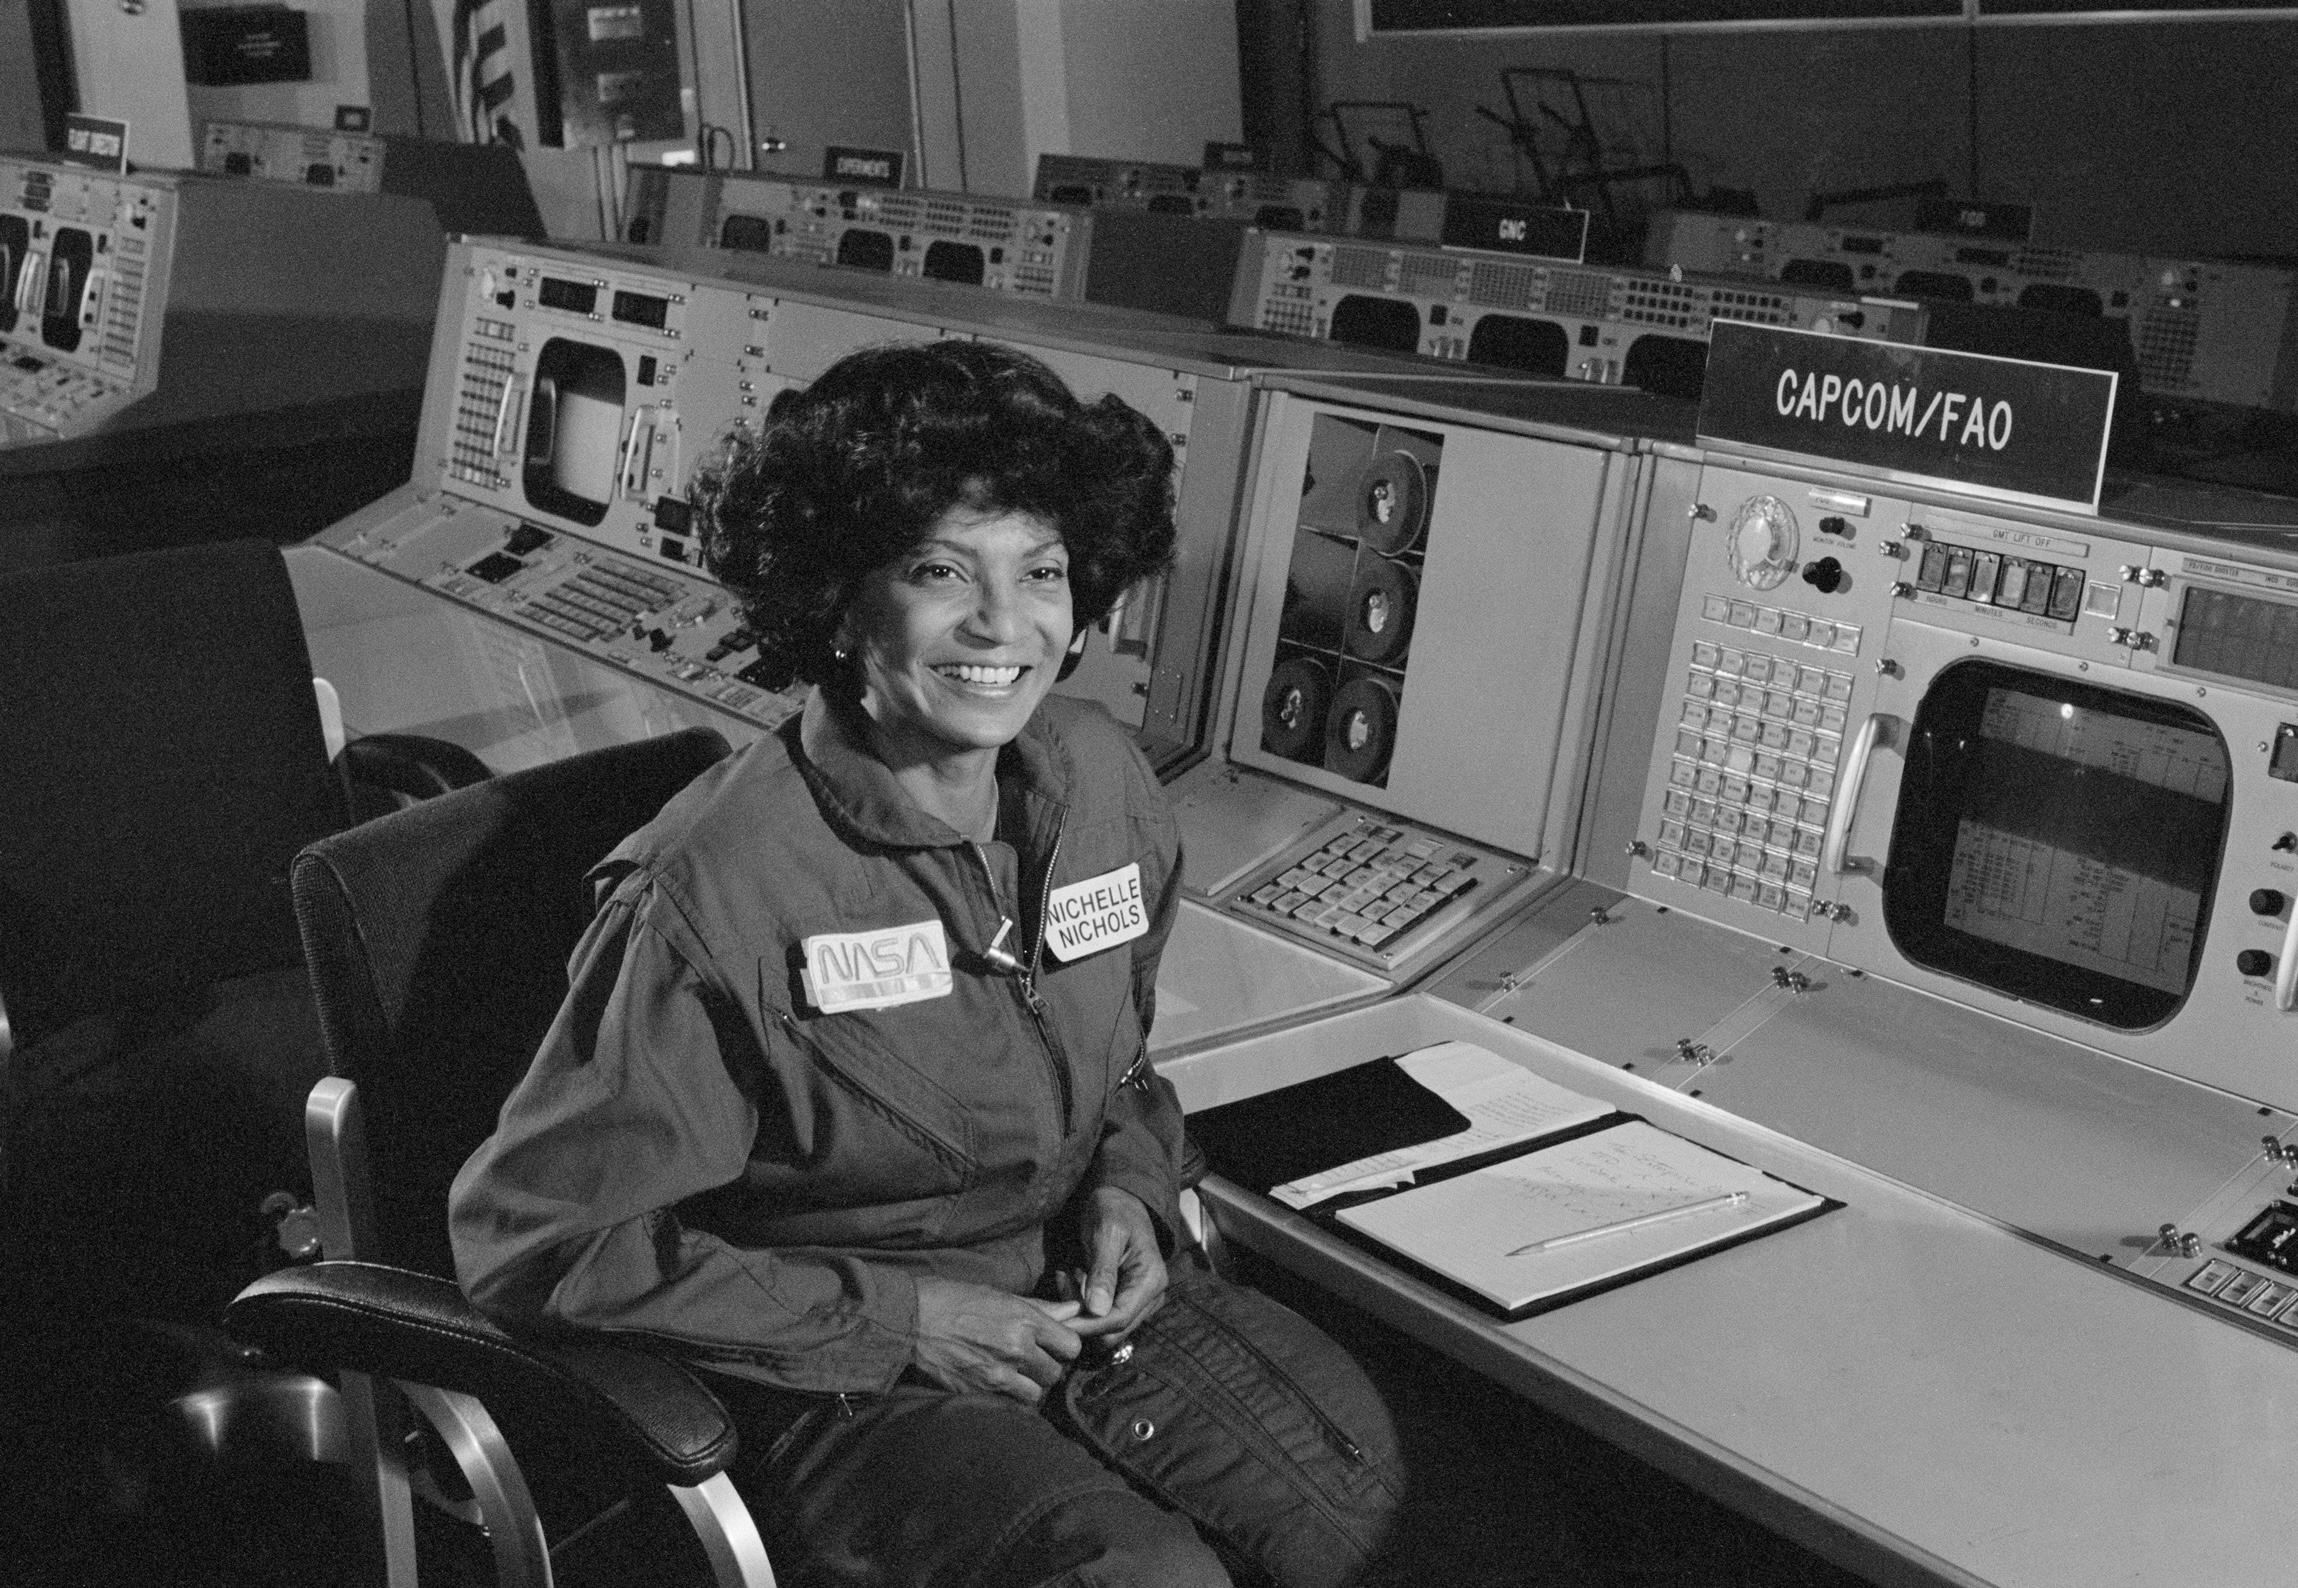 Nichelle Nichols, Chicagoland Native and Star Trek Actress Who Transformed NASA, Has Died at 89